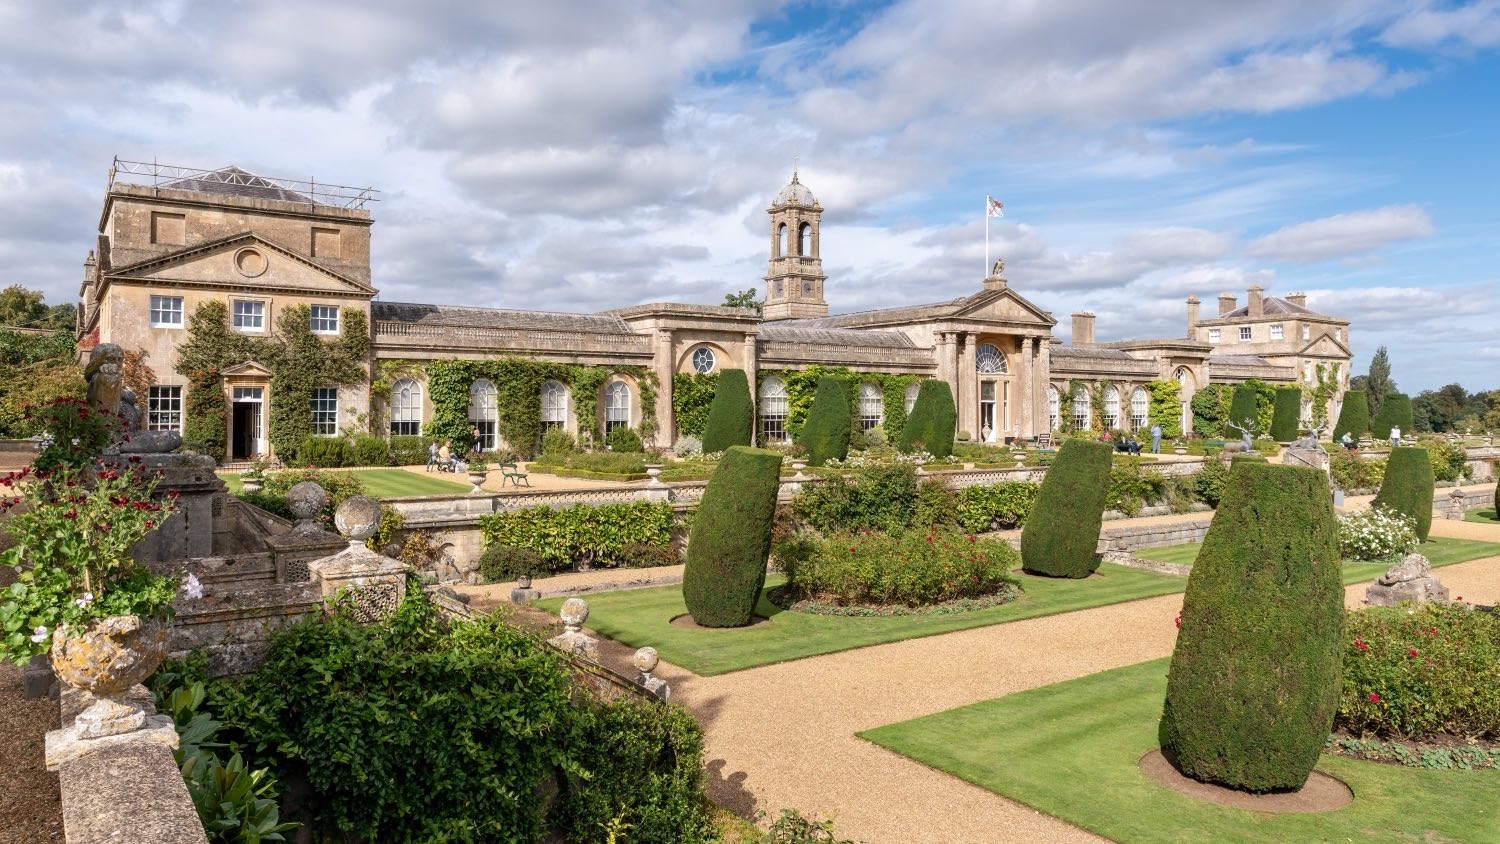 Bowood house from the corner of the garden, pruned hedges and grass verges in the foreground